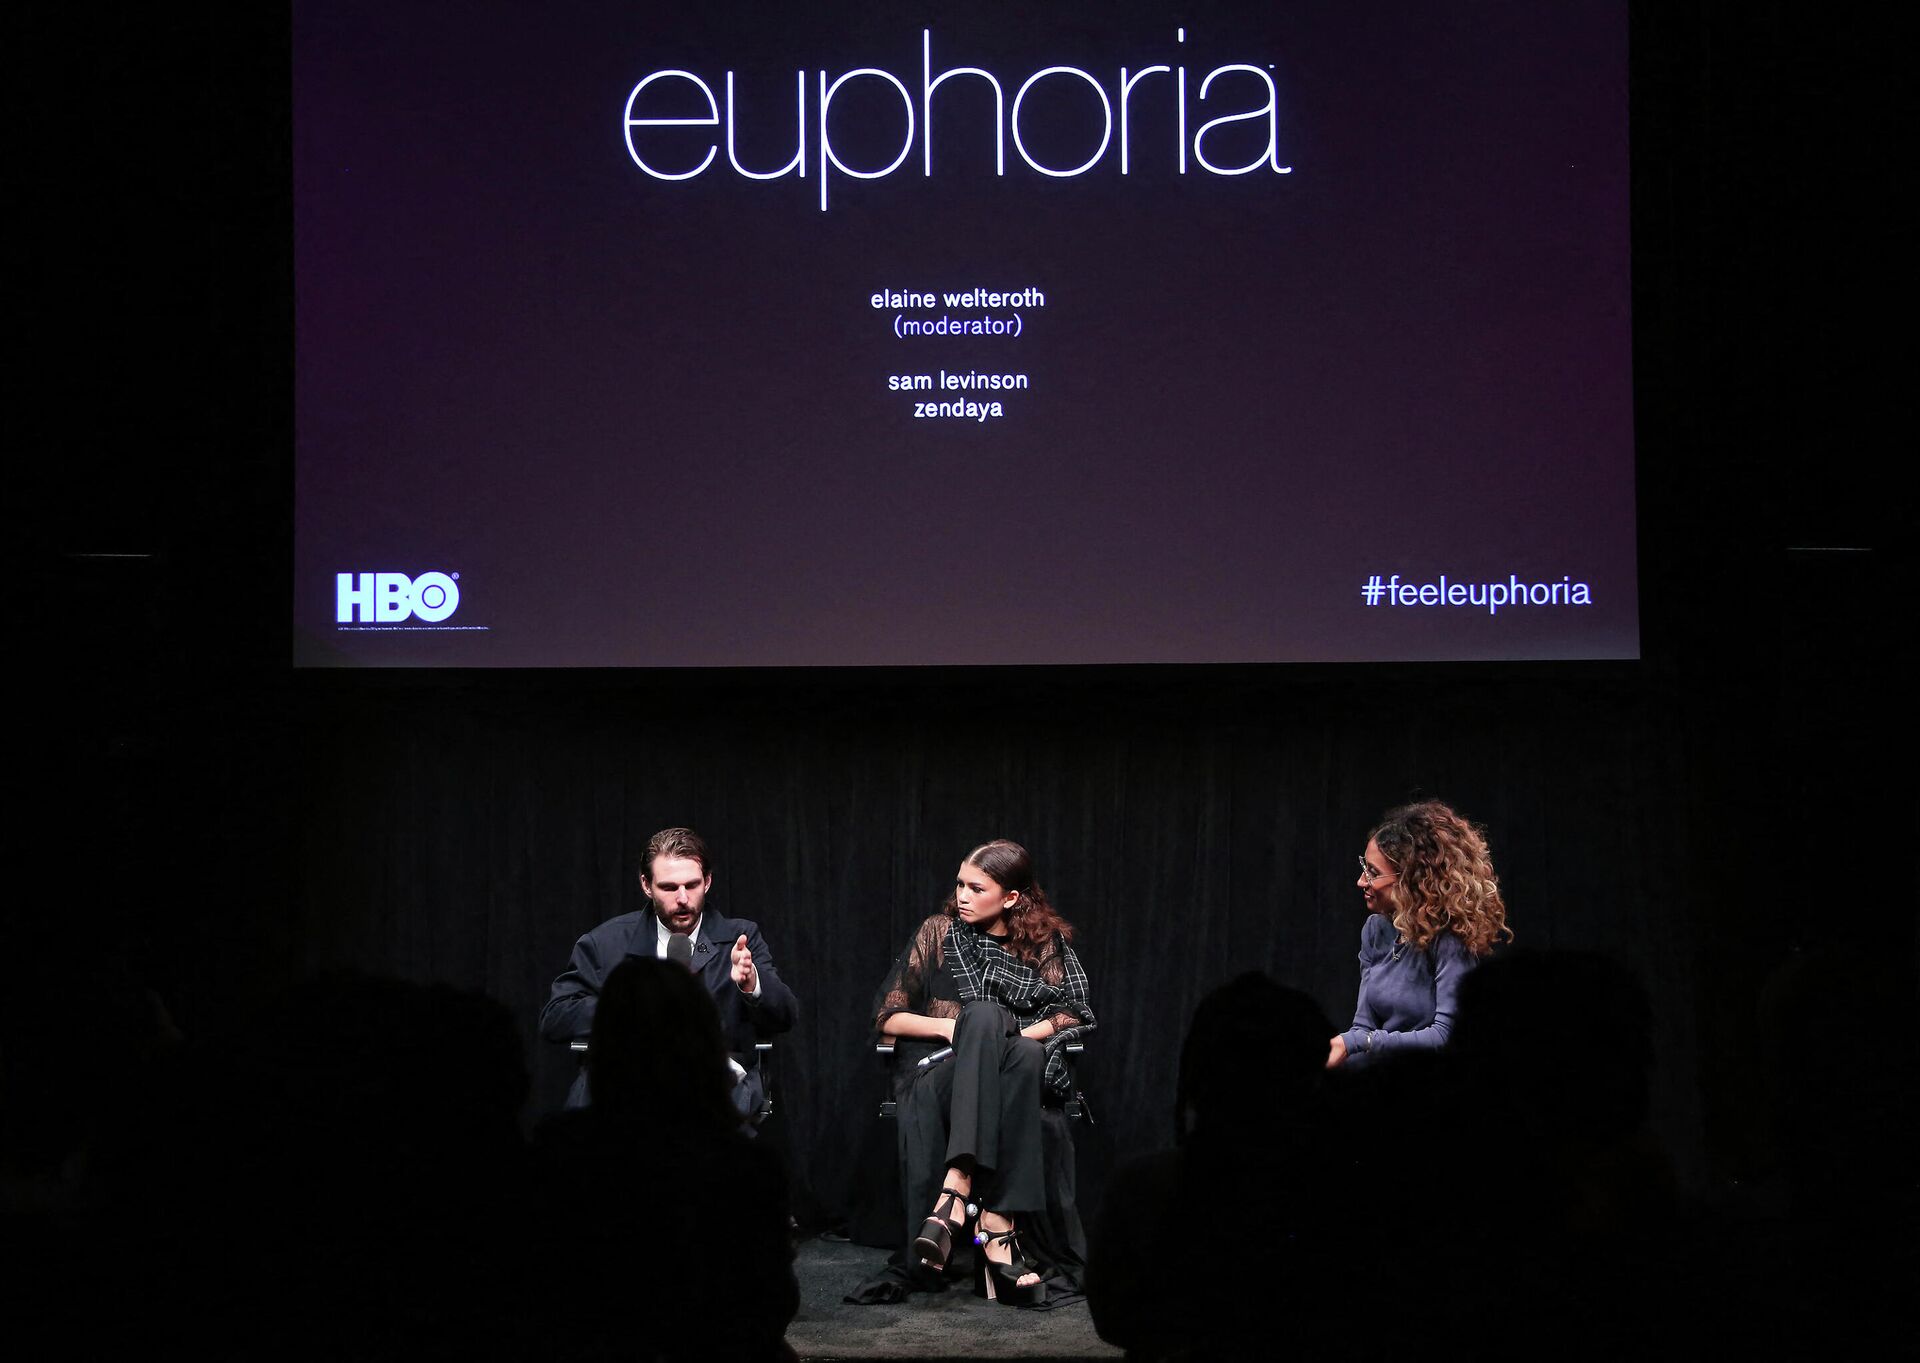 Writer and director Sam Levinson, actress and singer Zendaya and moderator Elaine Welteroth speak onstage at the New York screening of HBO's Euphoria on June 14, 2019 in New York City. - Sputnik International, 1920, 05.03.2022